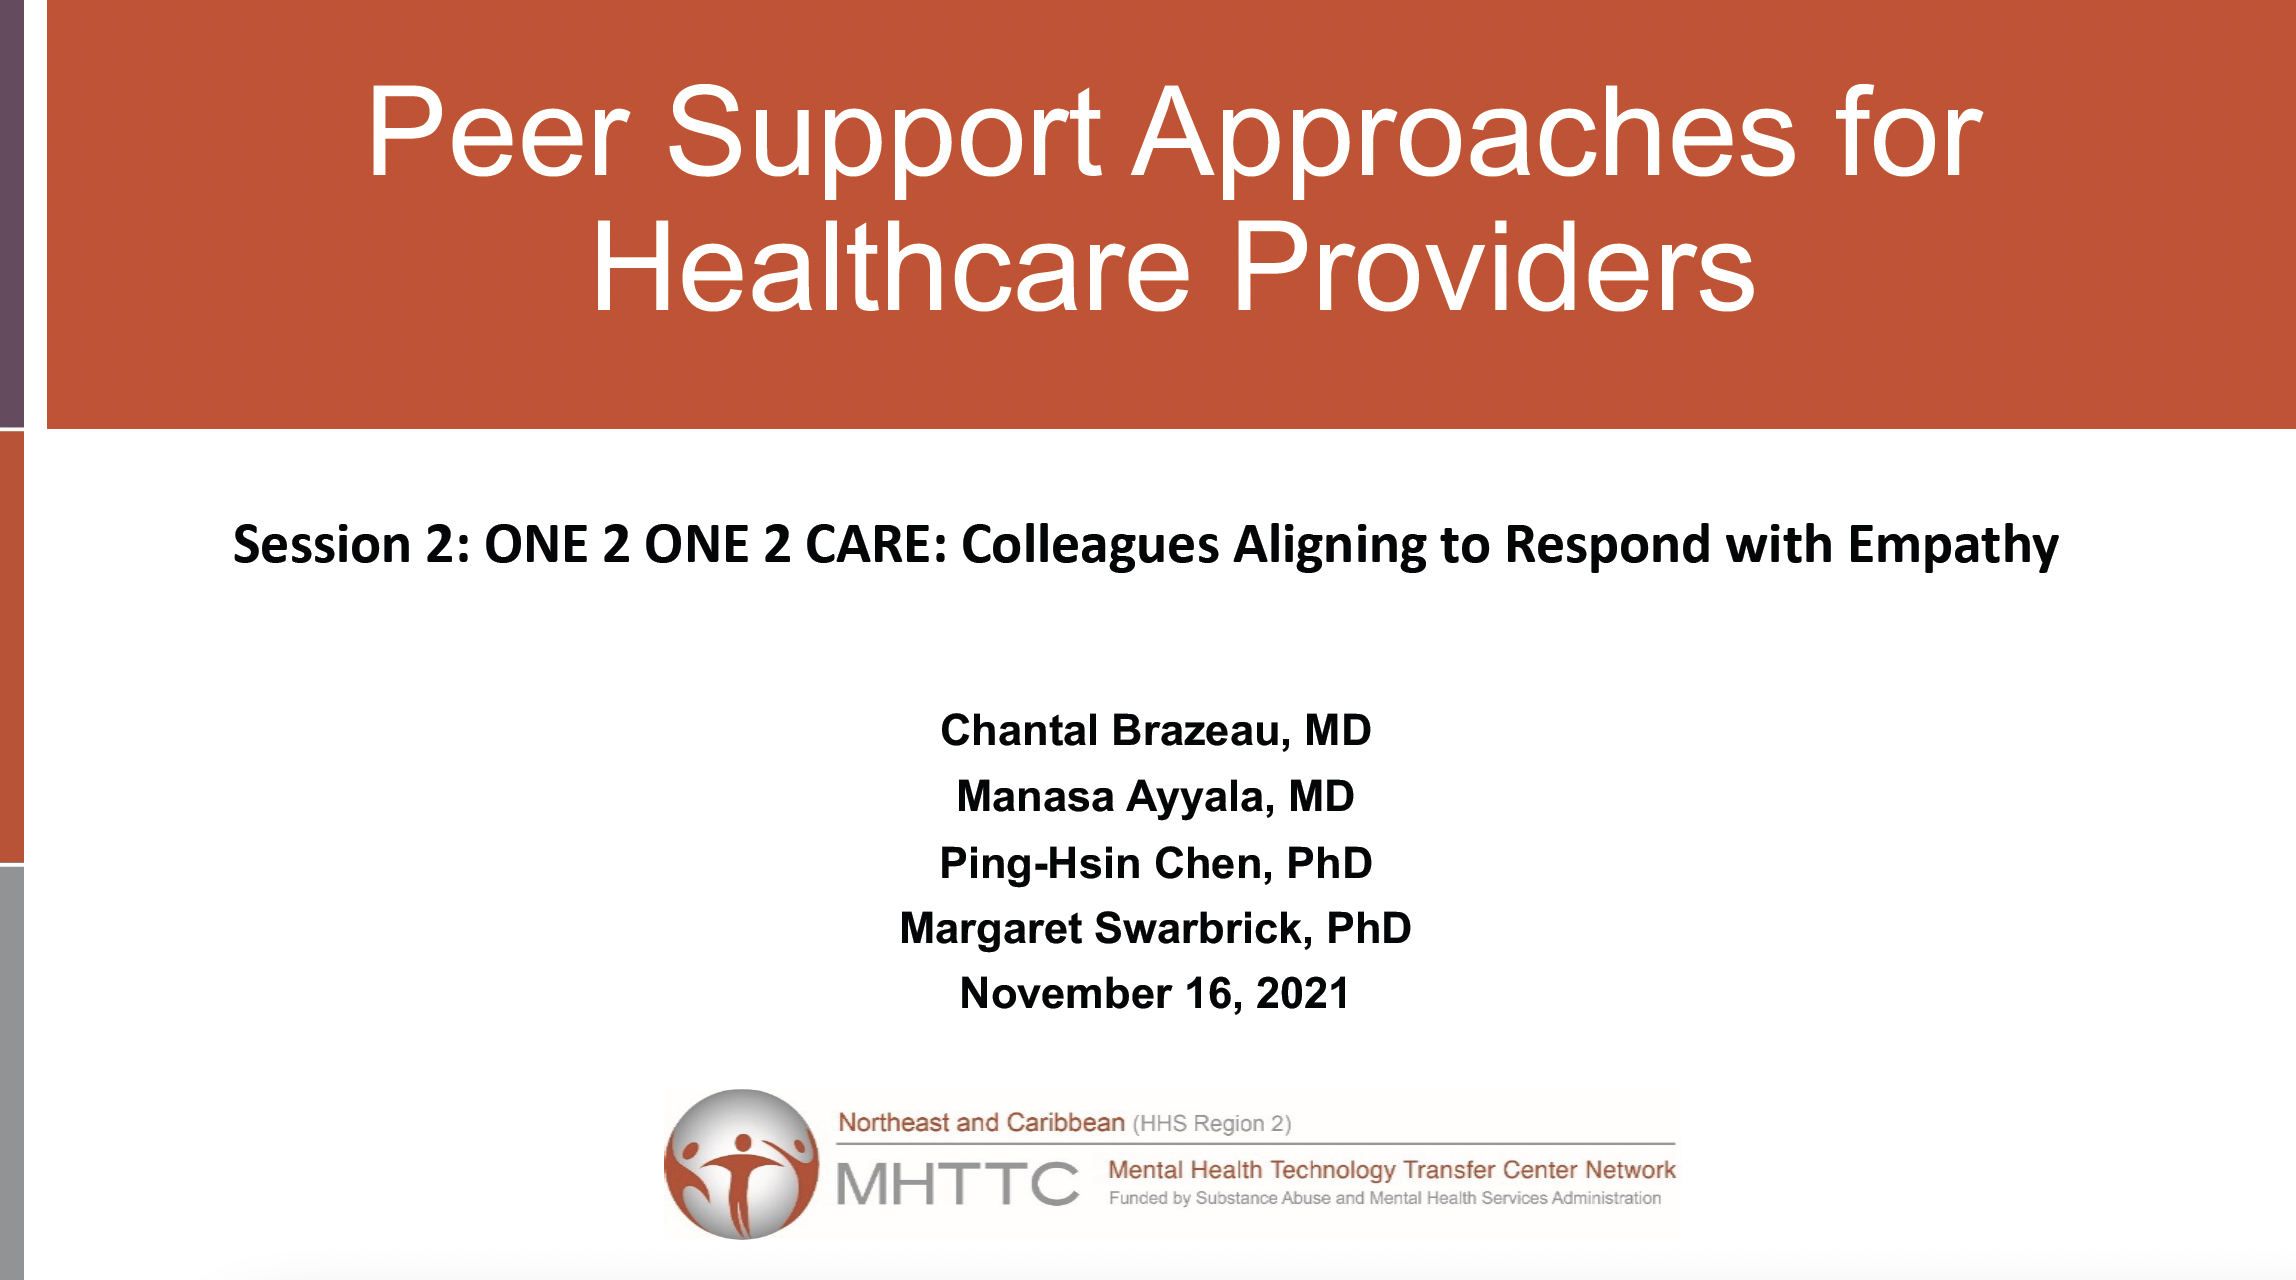 Peer Support Approaches for Healthcare Providers Session 2: ONE 2 ONE 2 CARE: Colleagues Aligning to Respond with Empathy